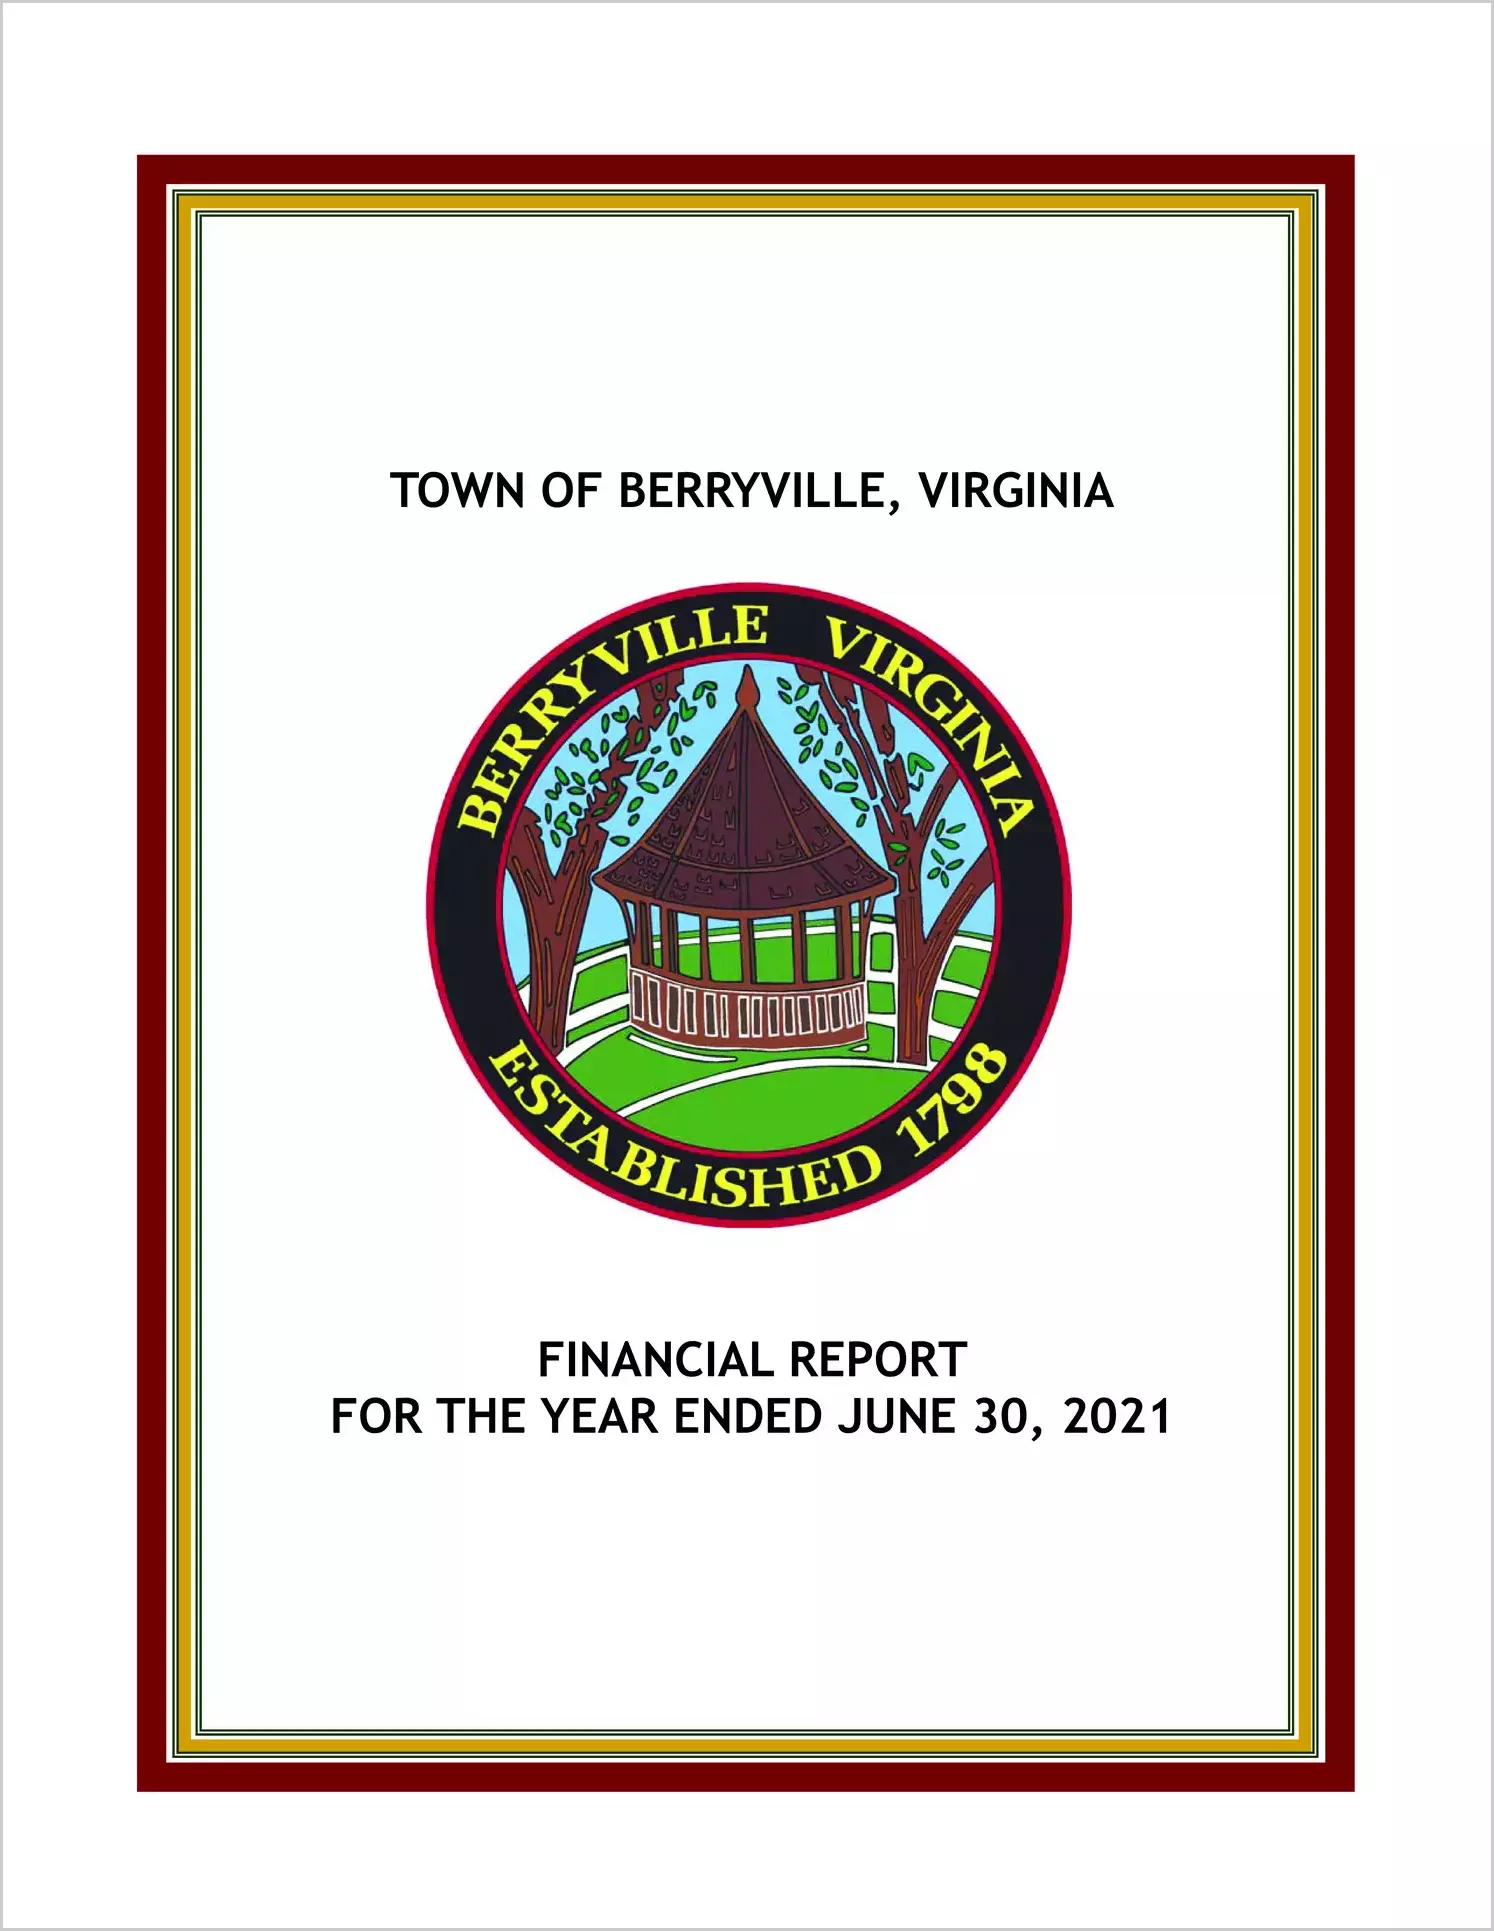 2021 Annual Financial Report for Town of Berryville